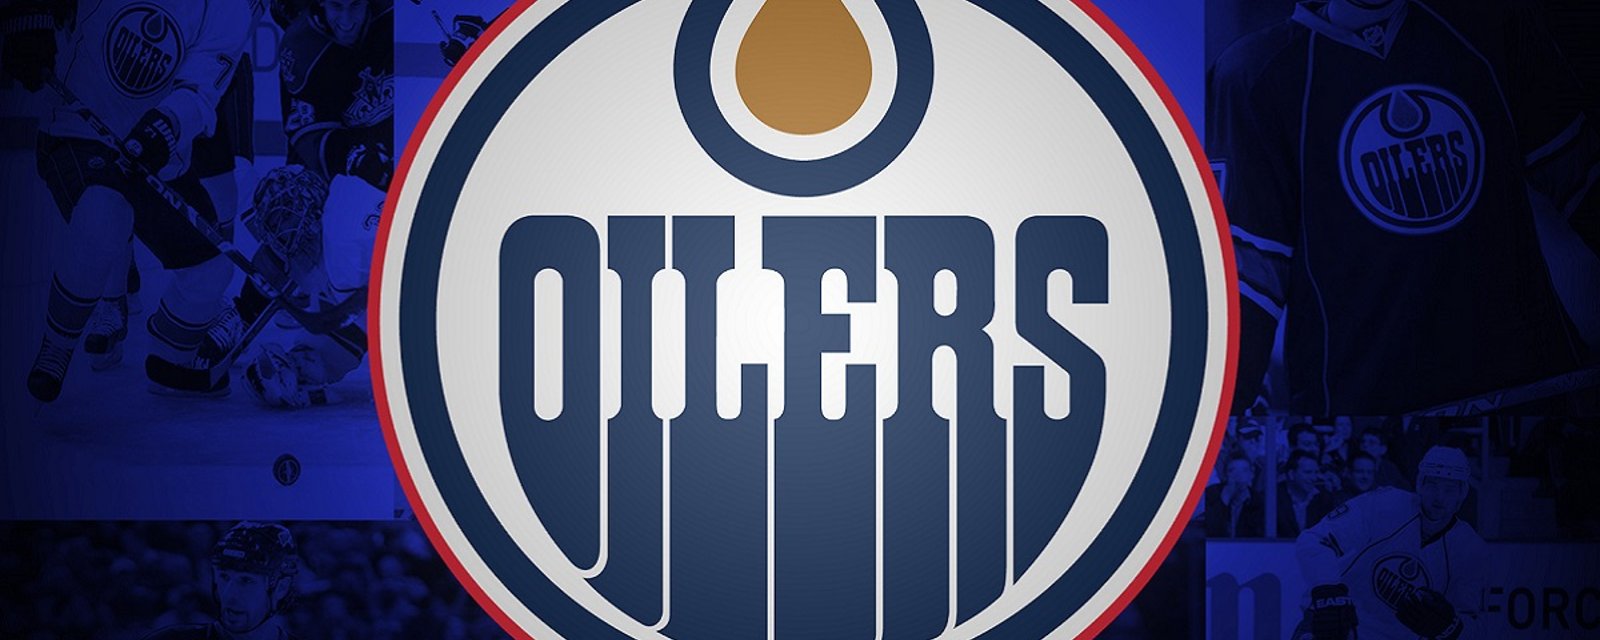 Insider believes the Oilers should make a big move in goal.